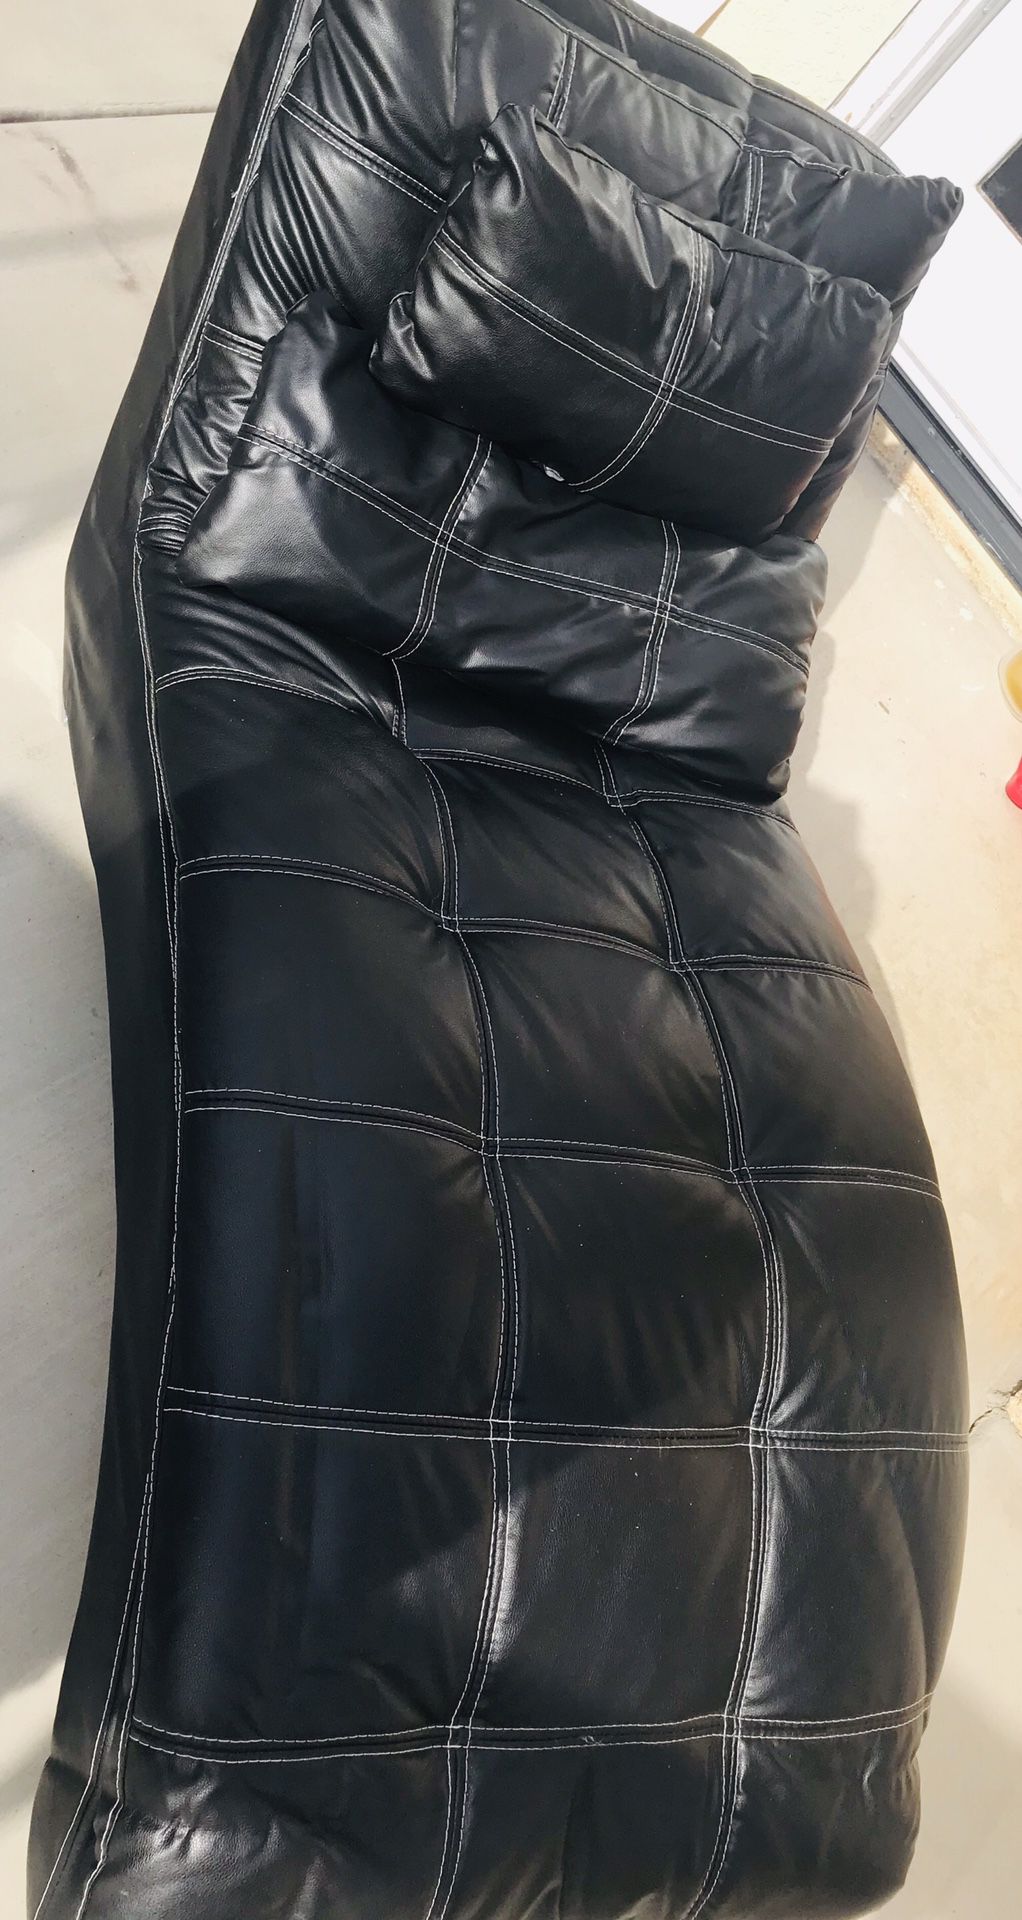 Black leather couch bed